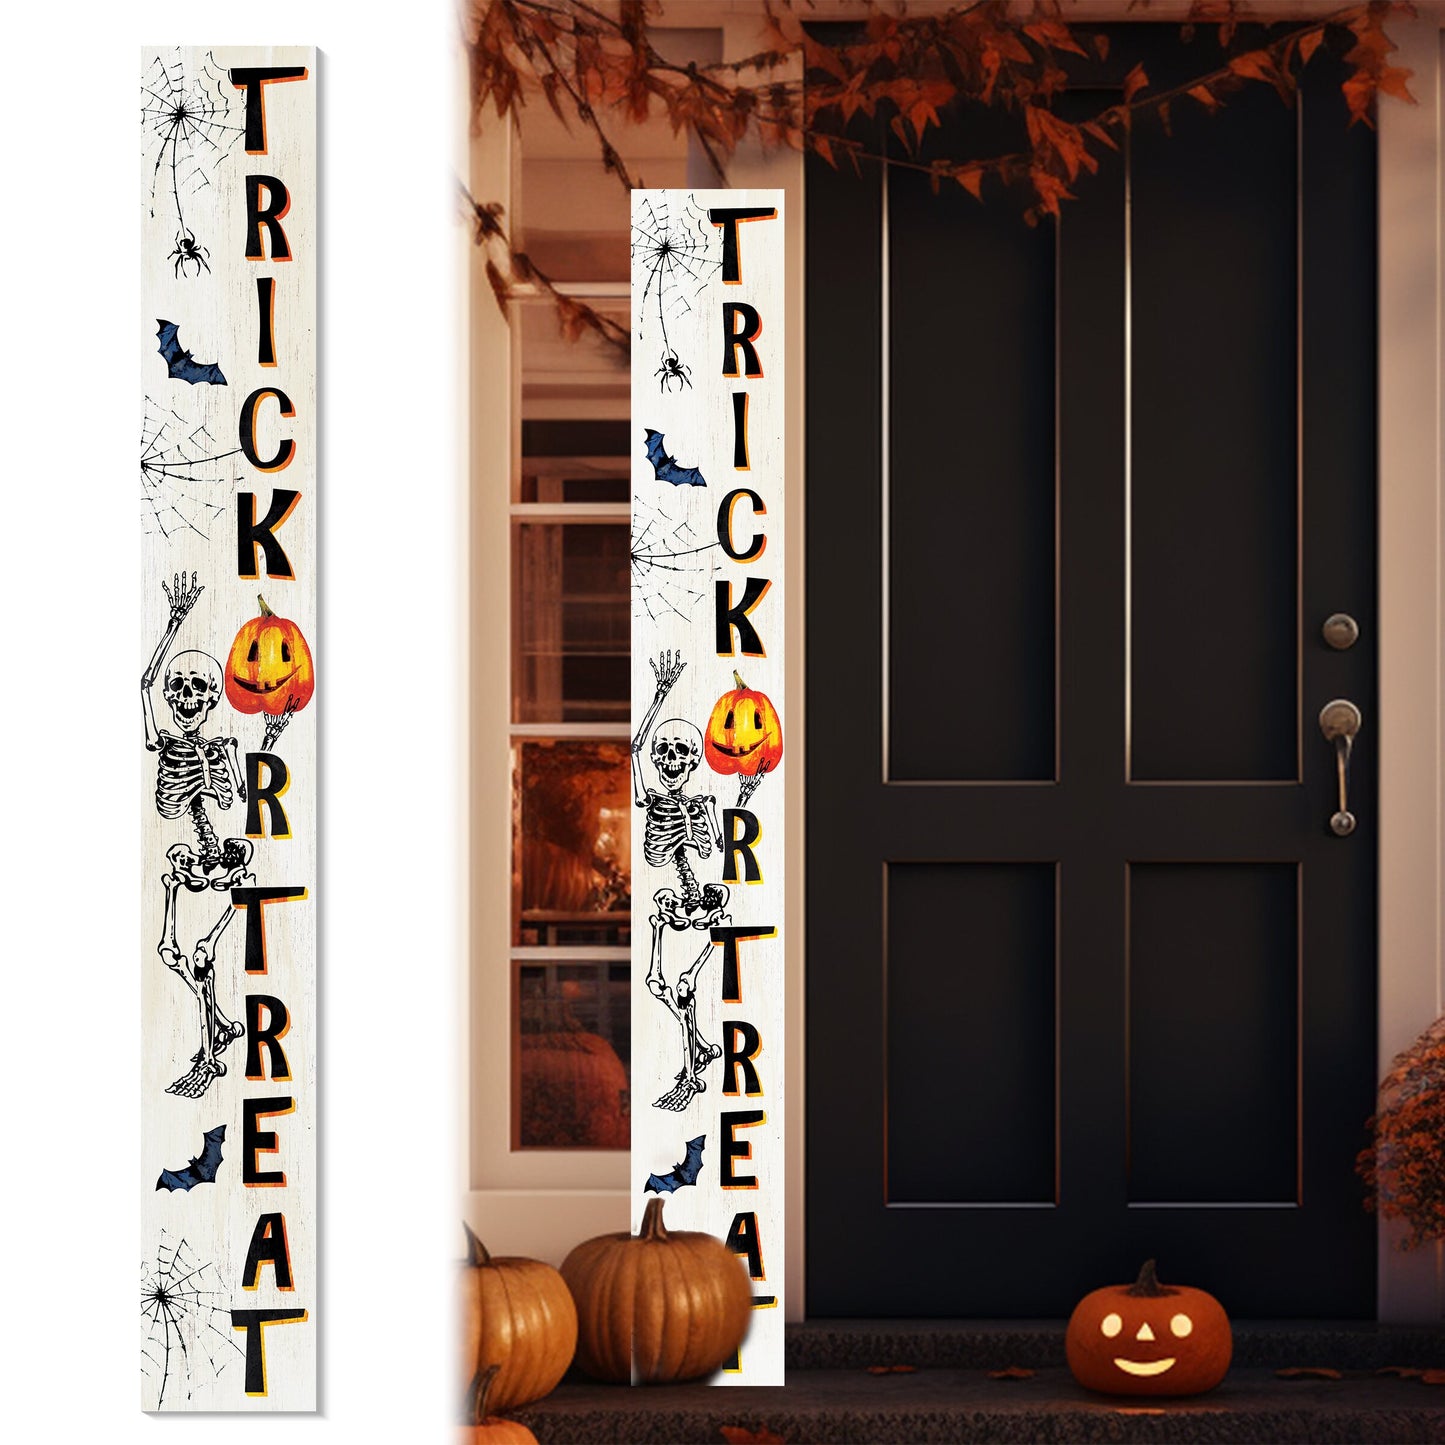 72-Inch Wooden "Trick or Treat" Skeleton Welcome Sign - Spooky Front Door Decoration  Rustic Halloween Accessory for Porch, Entryway